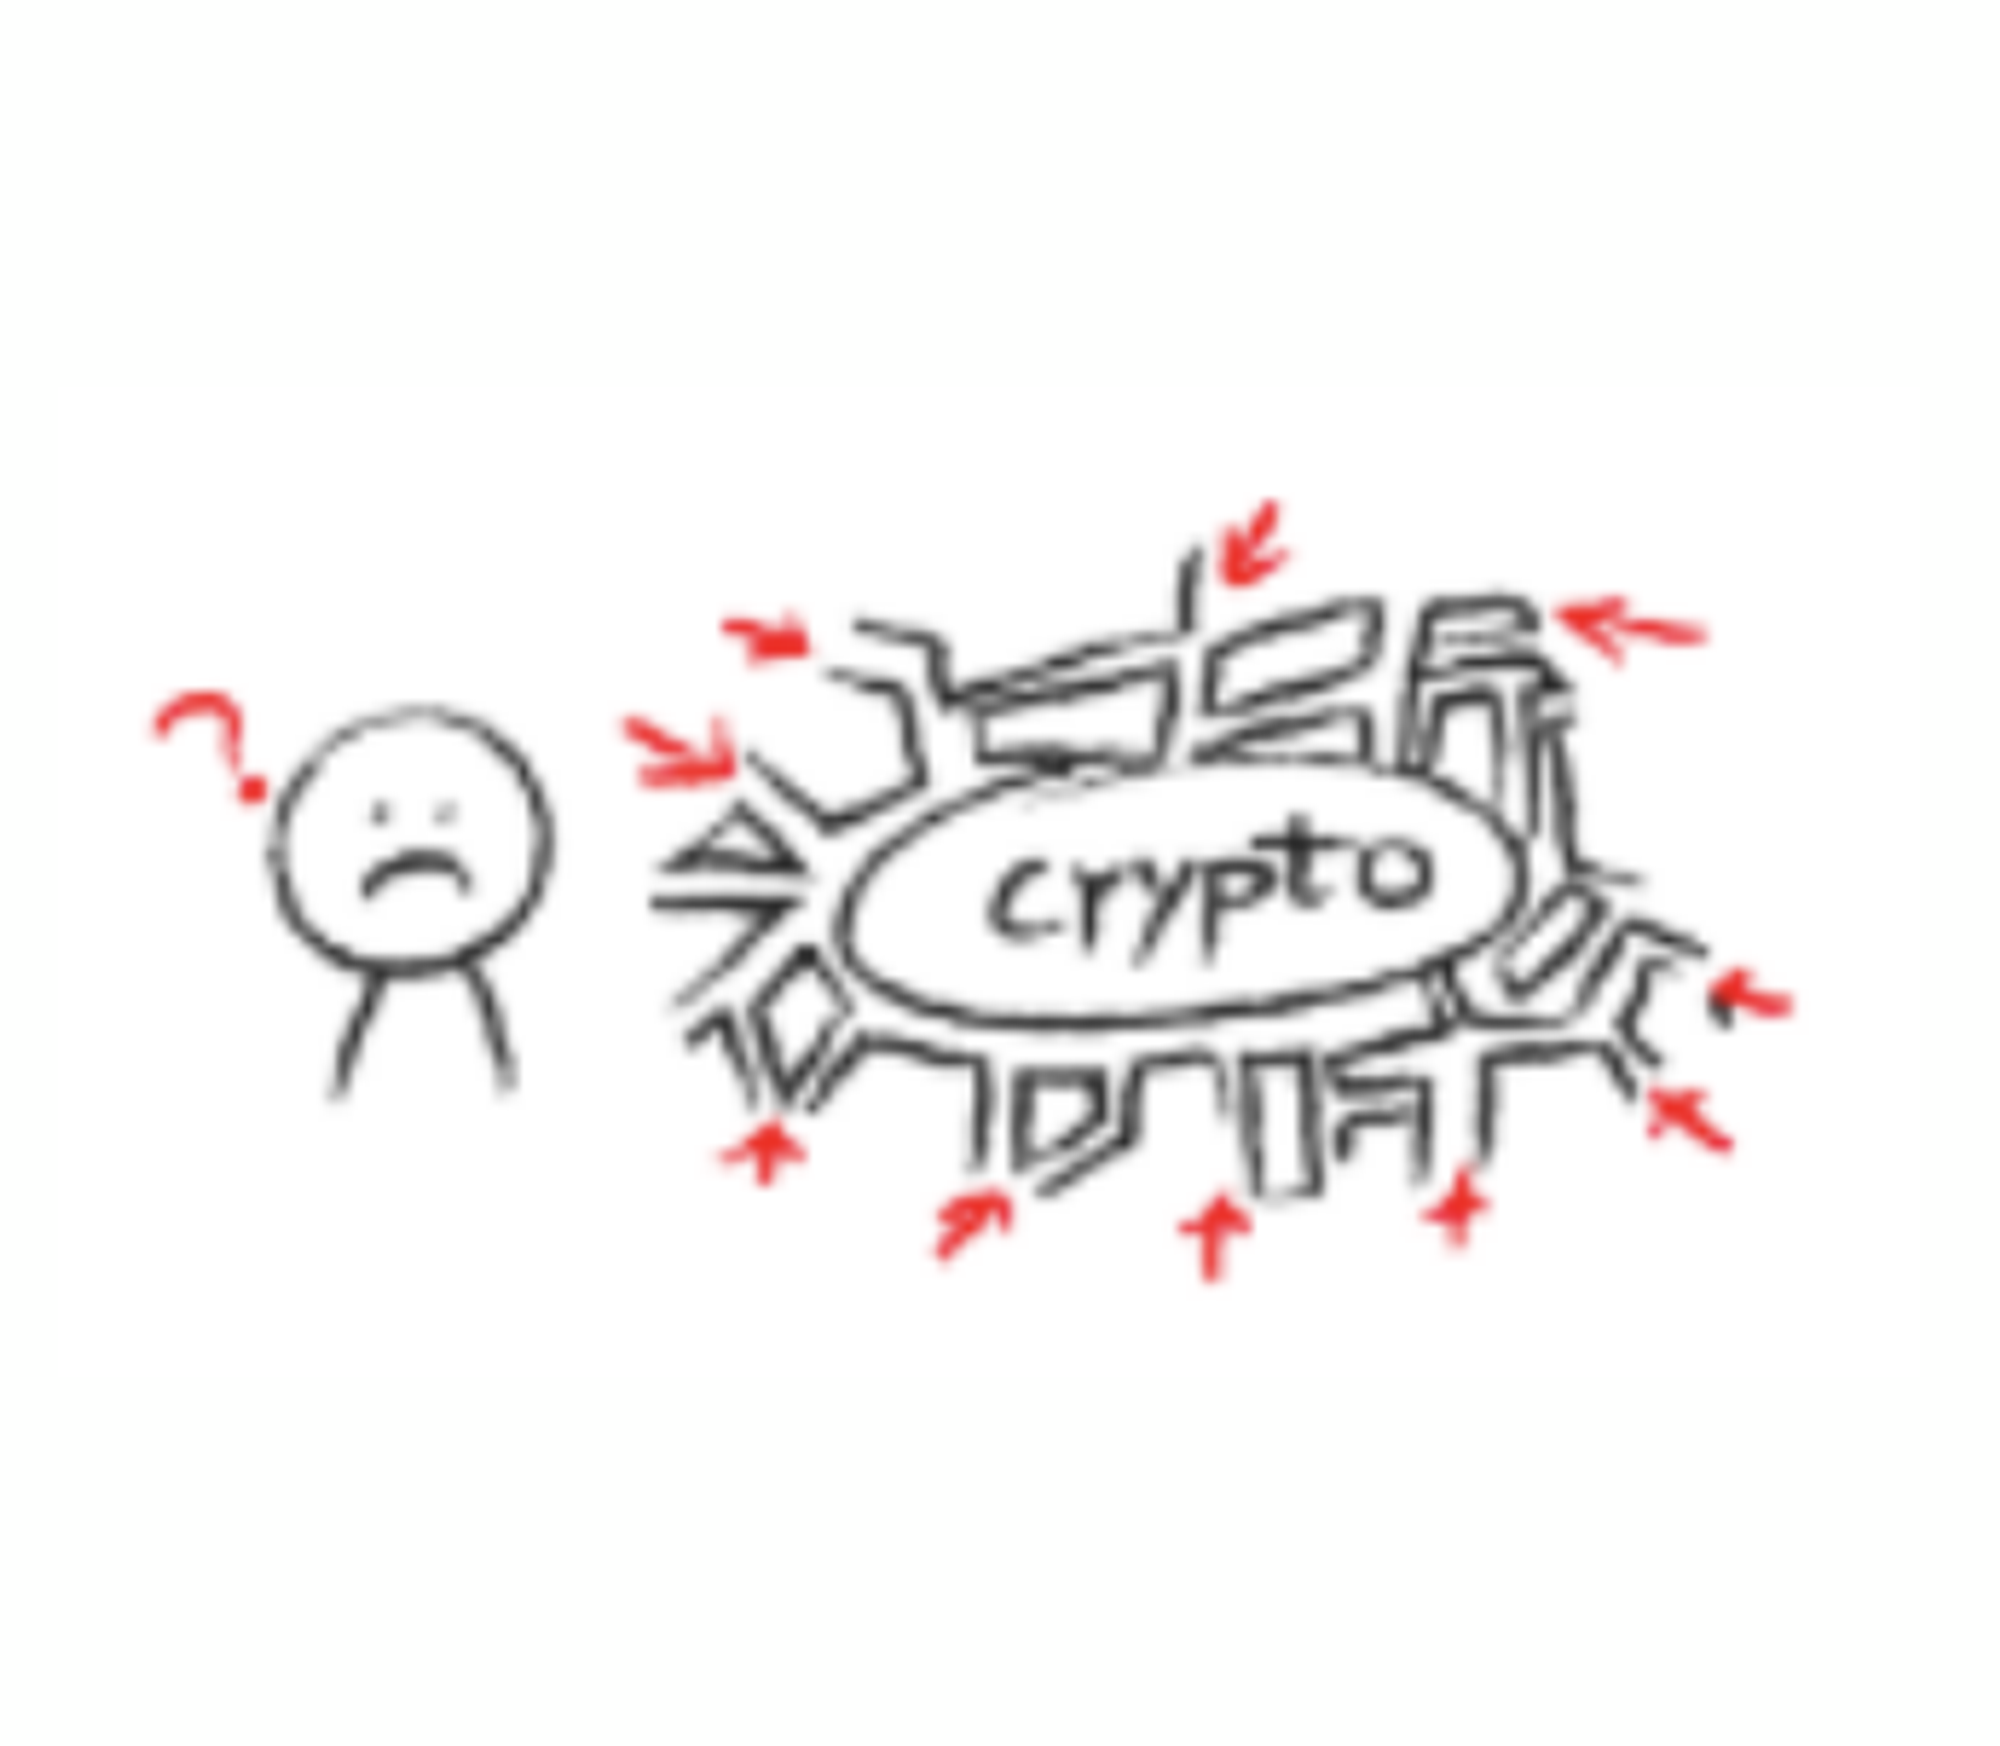 Crypto on-ramp help user convert crypto currency via payment options the are familiar with